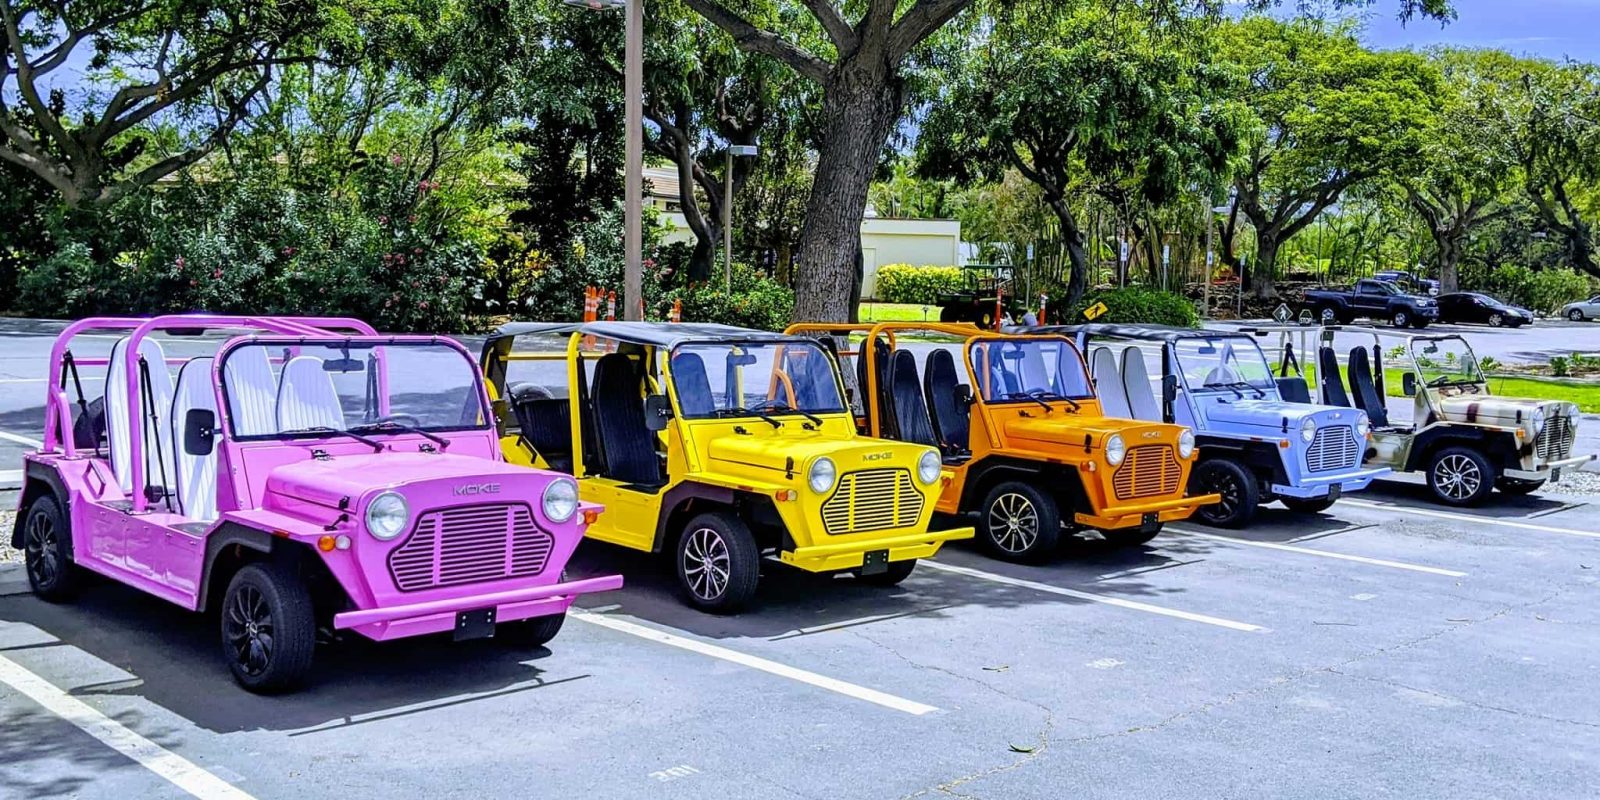 Fun little electric jeep-like Moke vehicles now renting out in the US